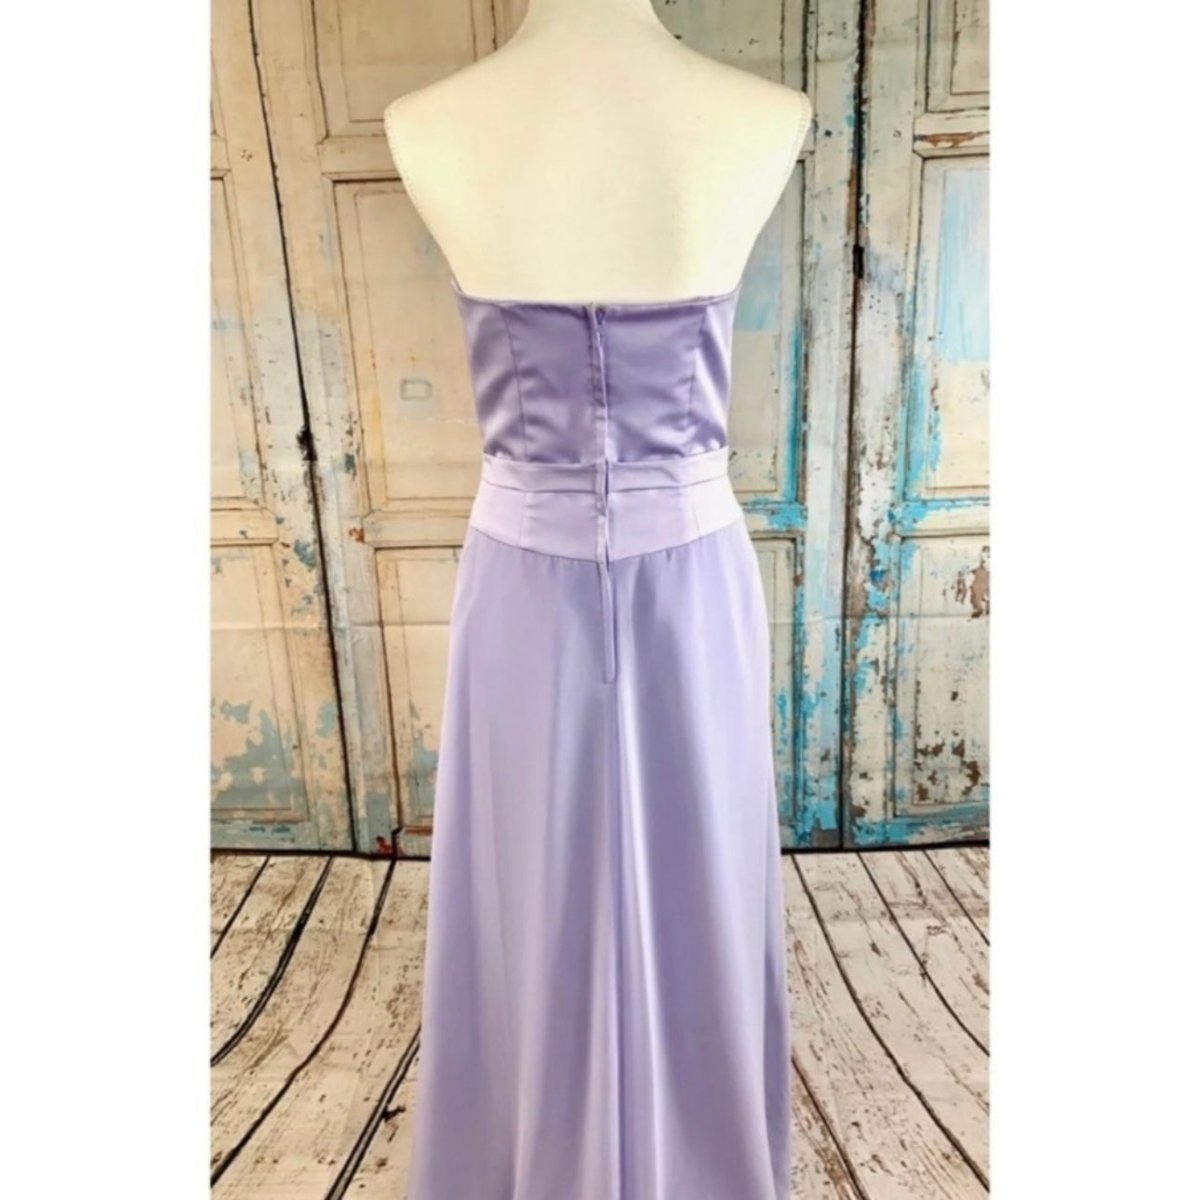 Alfred Angelo - Alfred Angelo Size M? Lavender Strapless Satin & Chiffon Formal Dress With Bow - Dresses - Afterglow Market